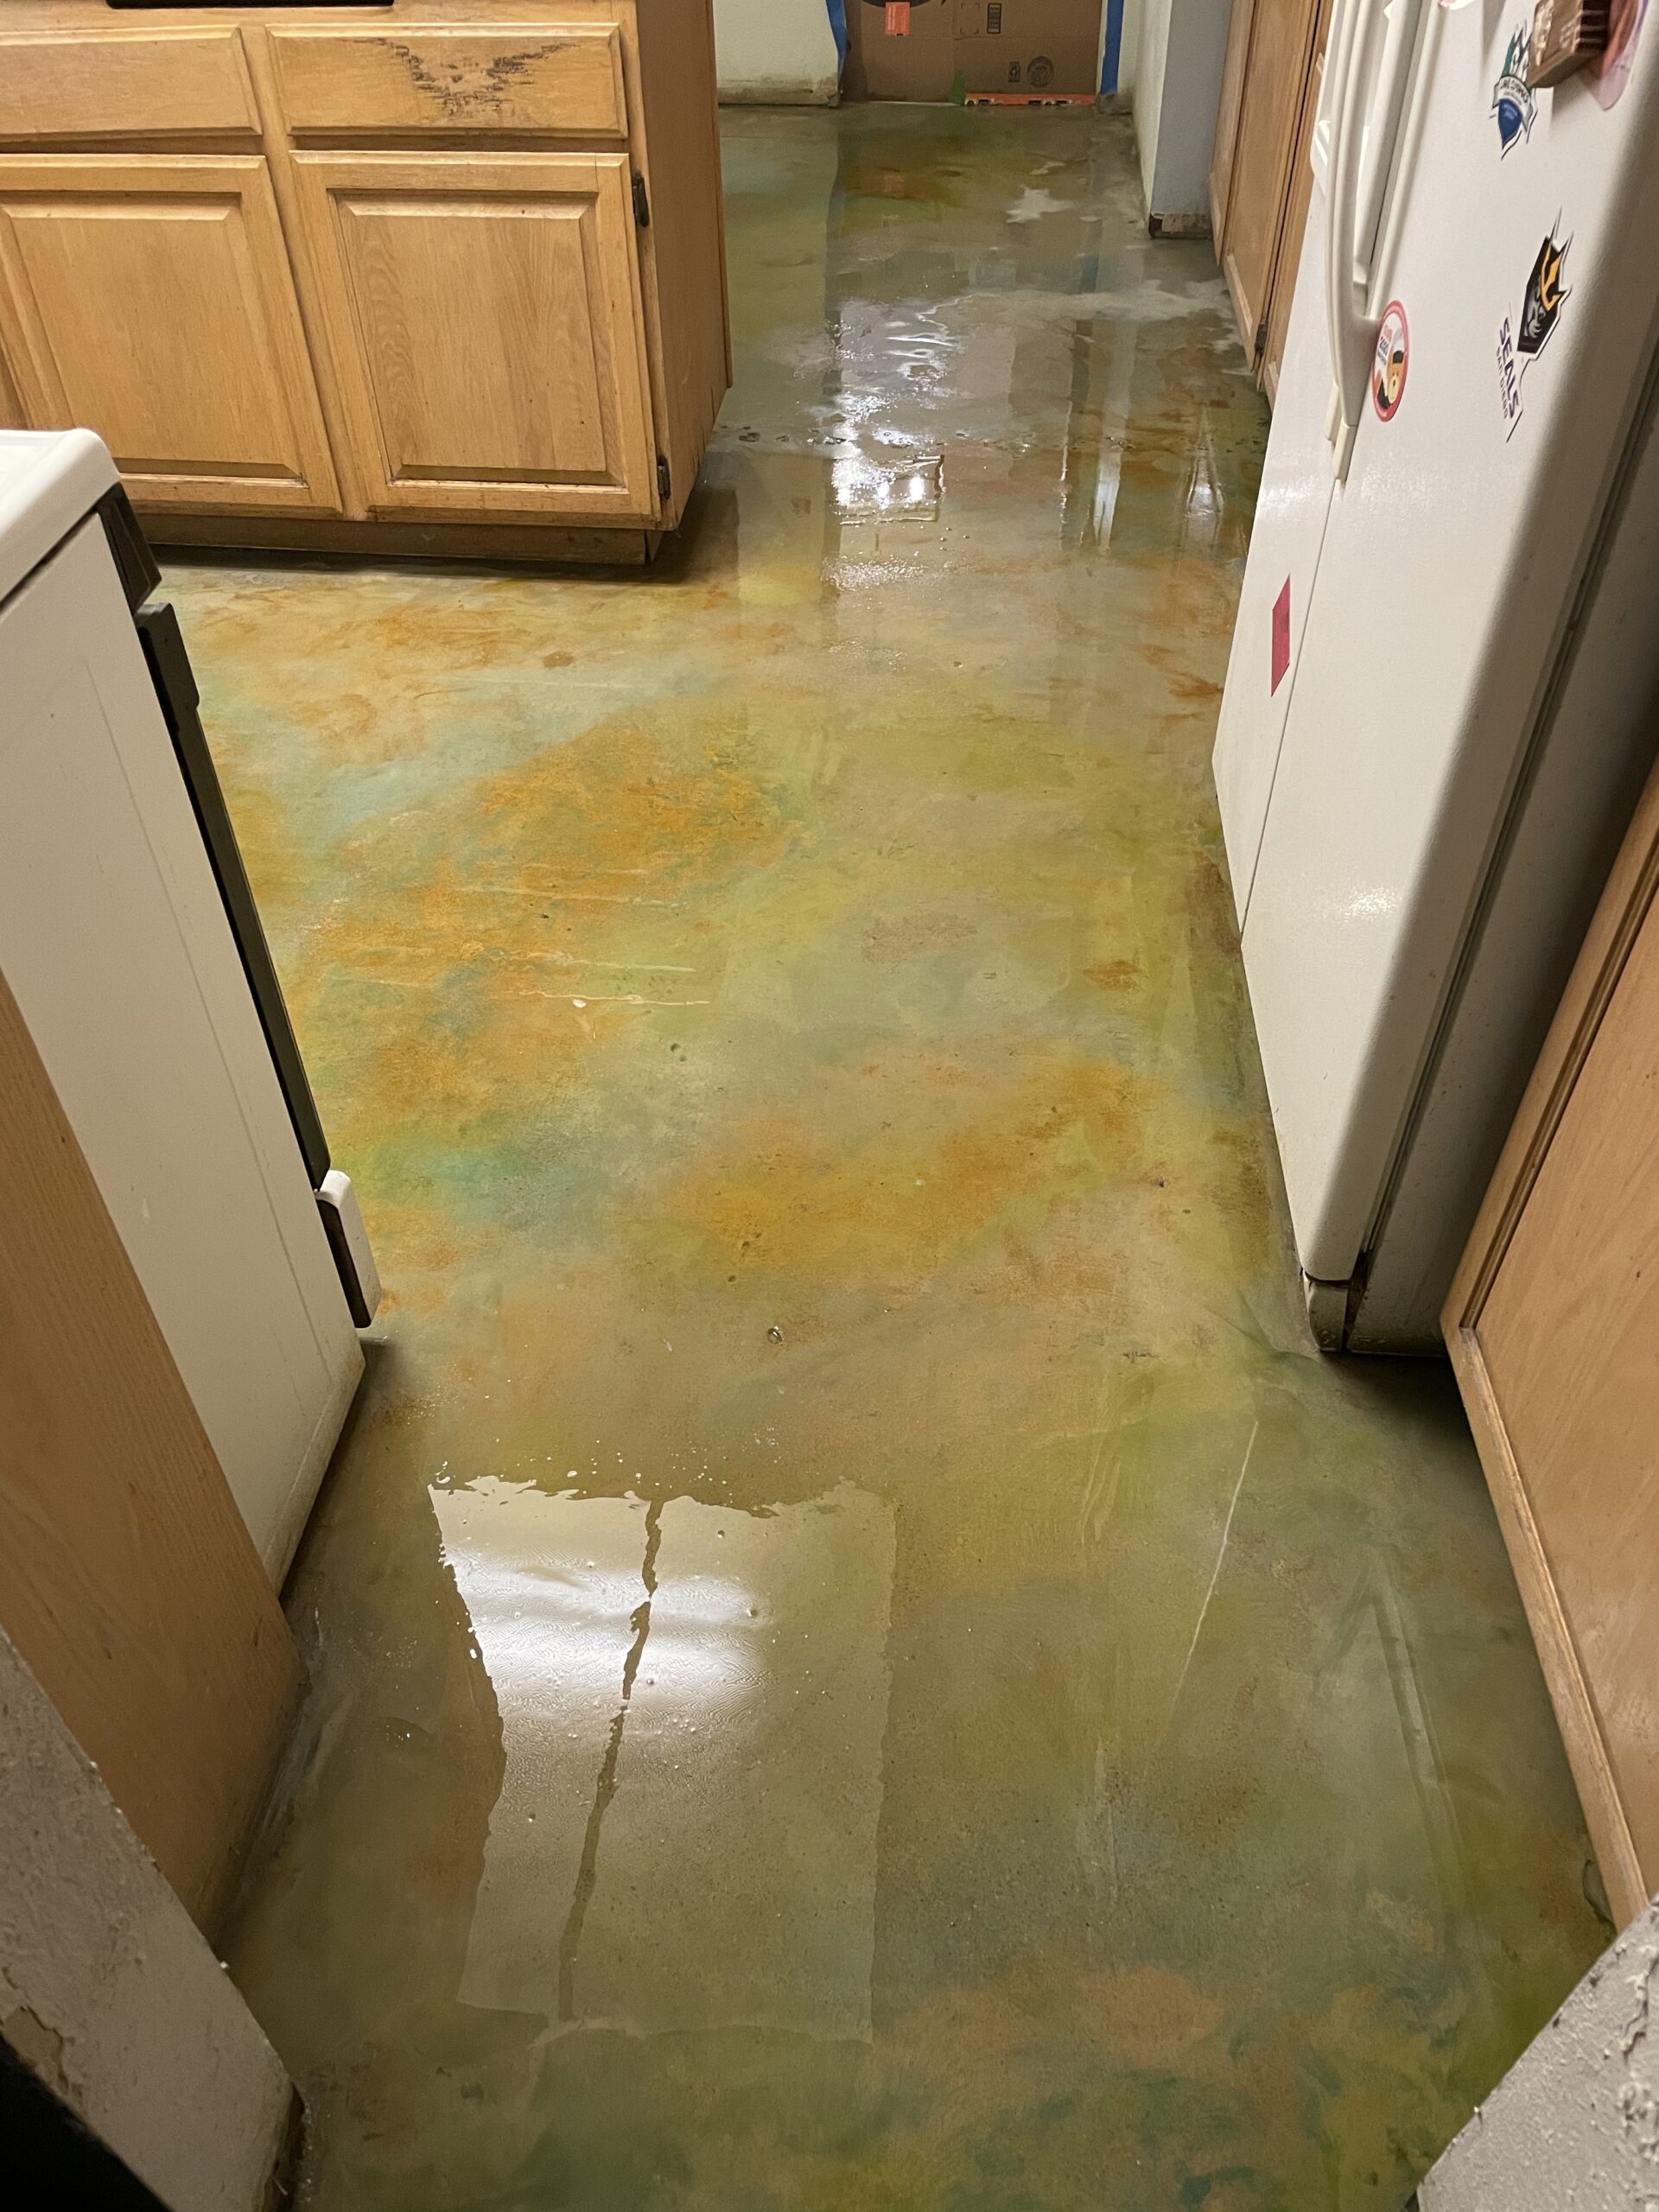 Acid stain on concrete floor while wet